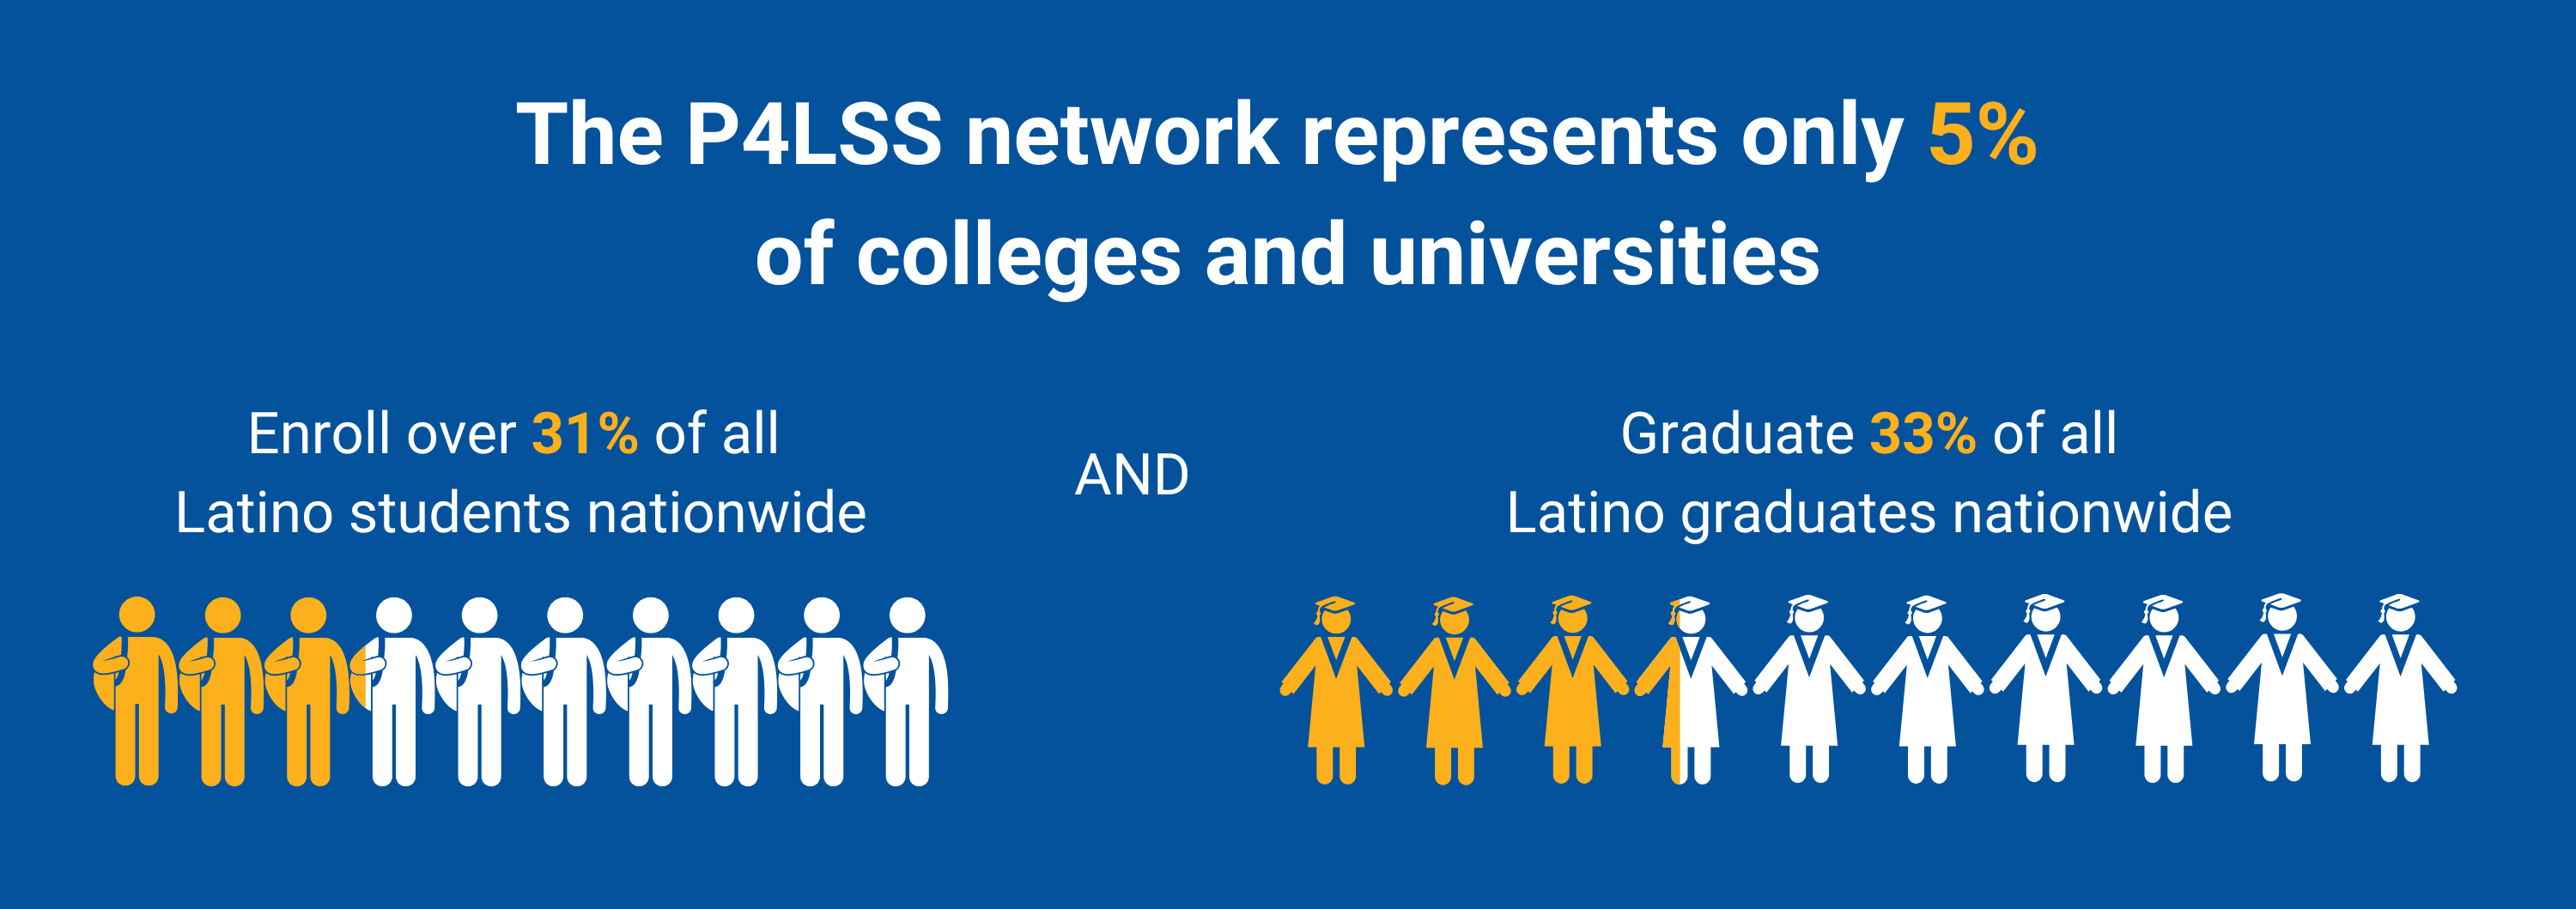 The P4LSS network represents only 5% of colleges and universities, yet it enrolls 31% and graduates 33% of all Latino students.